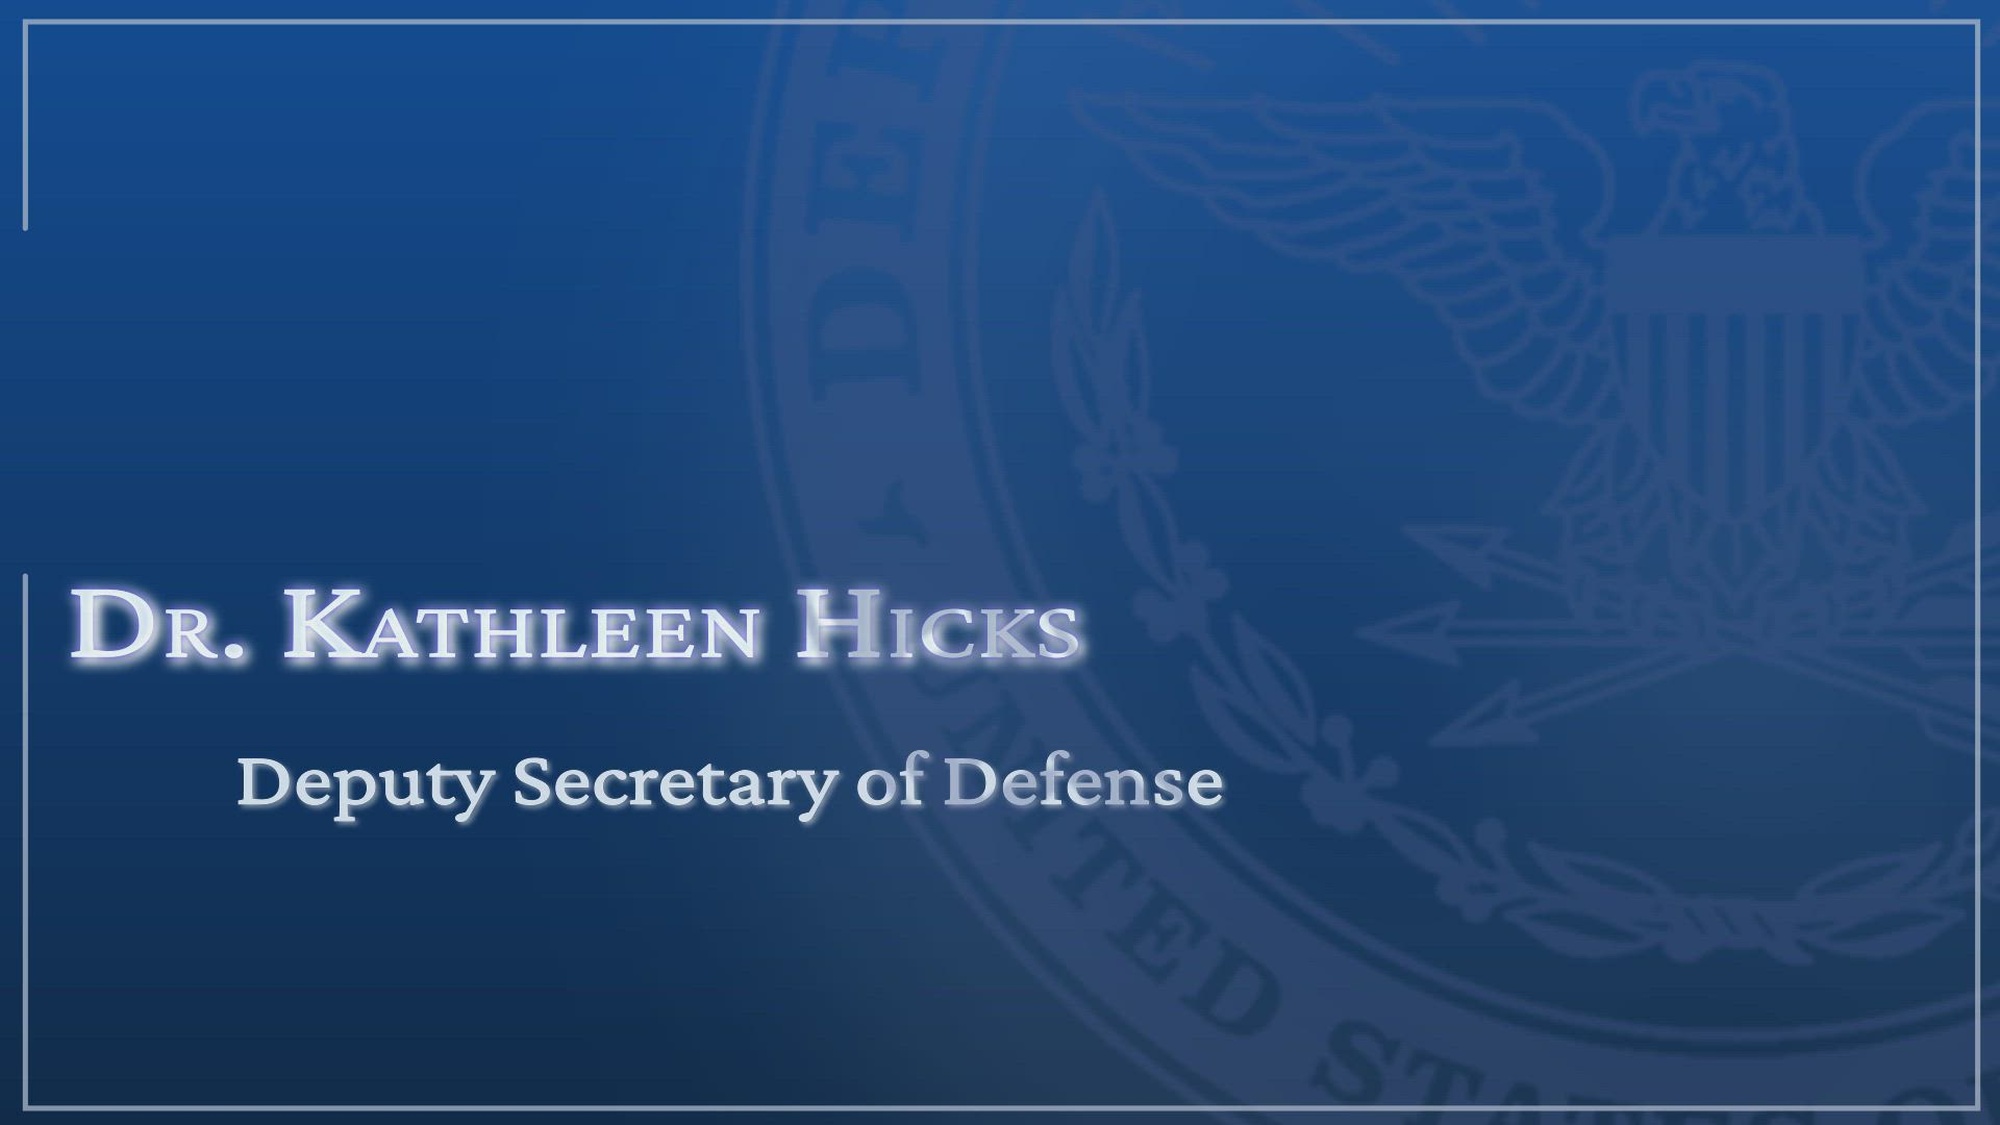 Deputy Defense Secretary Kathleen Hicks discusses the department’s approach to leveraging artificial intelligence, data, and digital solutions to counter advanced threats to U.S. national security.